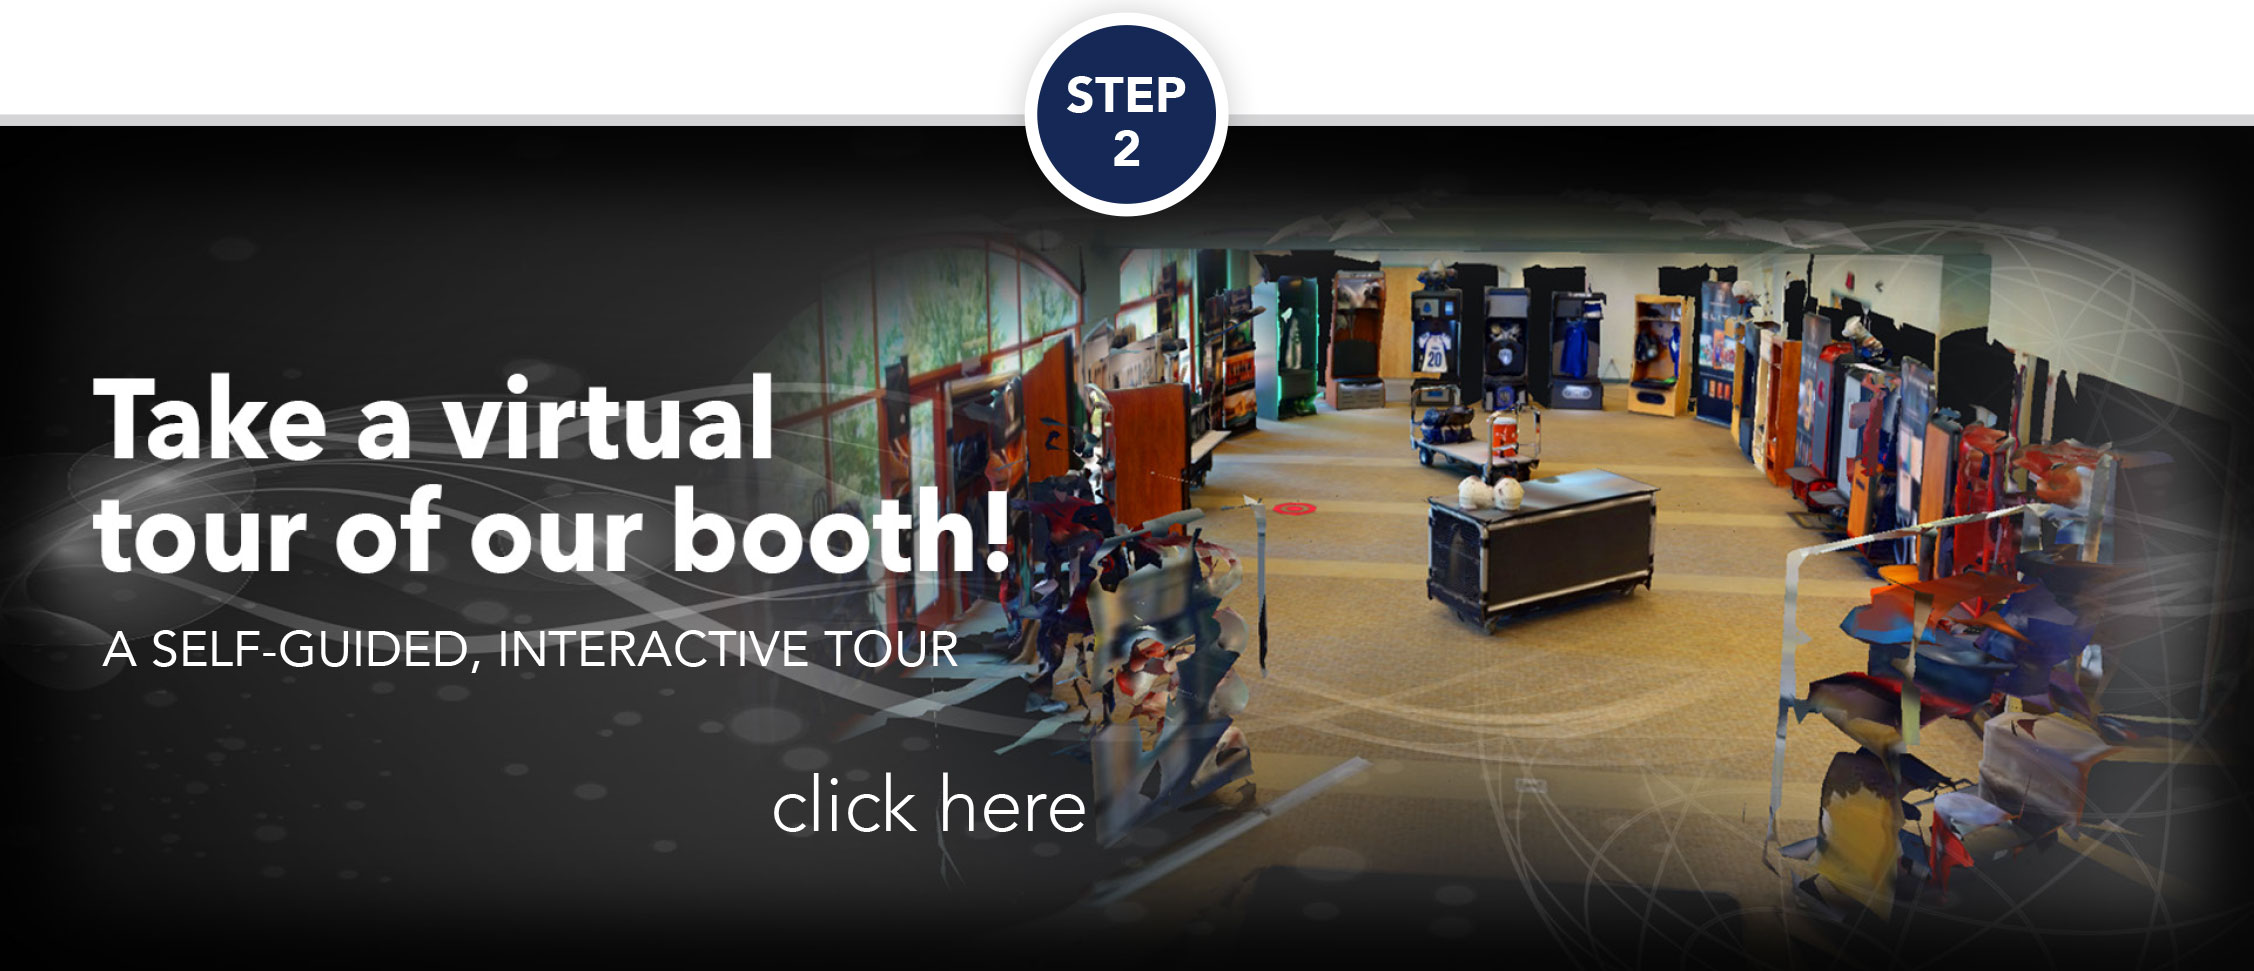 Step 2: Take a virtual tour of our booth